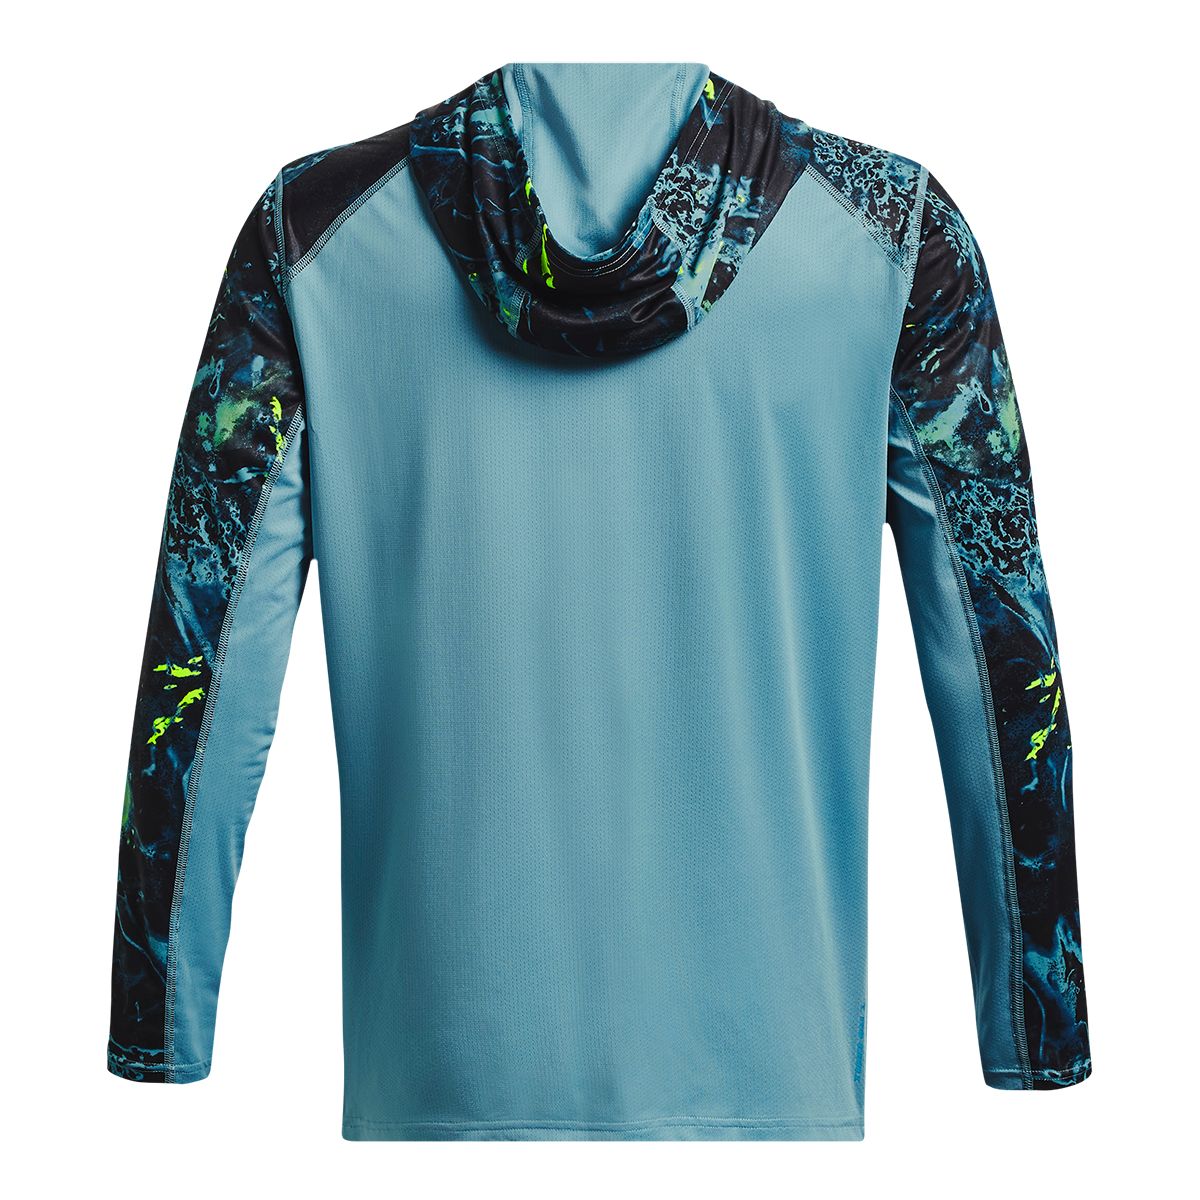 https://media-www.sportchek.ca/product/div-03-softgoods/dpt-72-casual-clothing/sdpt-01-mens/333989675/under-armour-men-s-iso-chill-shorebreak-camo-hoodie-f4bc64d2-a5a6-4ebc-828b-2b0738da5e3a-jpgrendition.jpg?imdensity=1&imwidth=1244&impolicy=mZoom